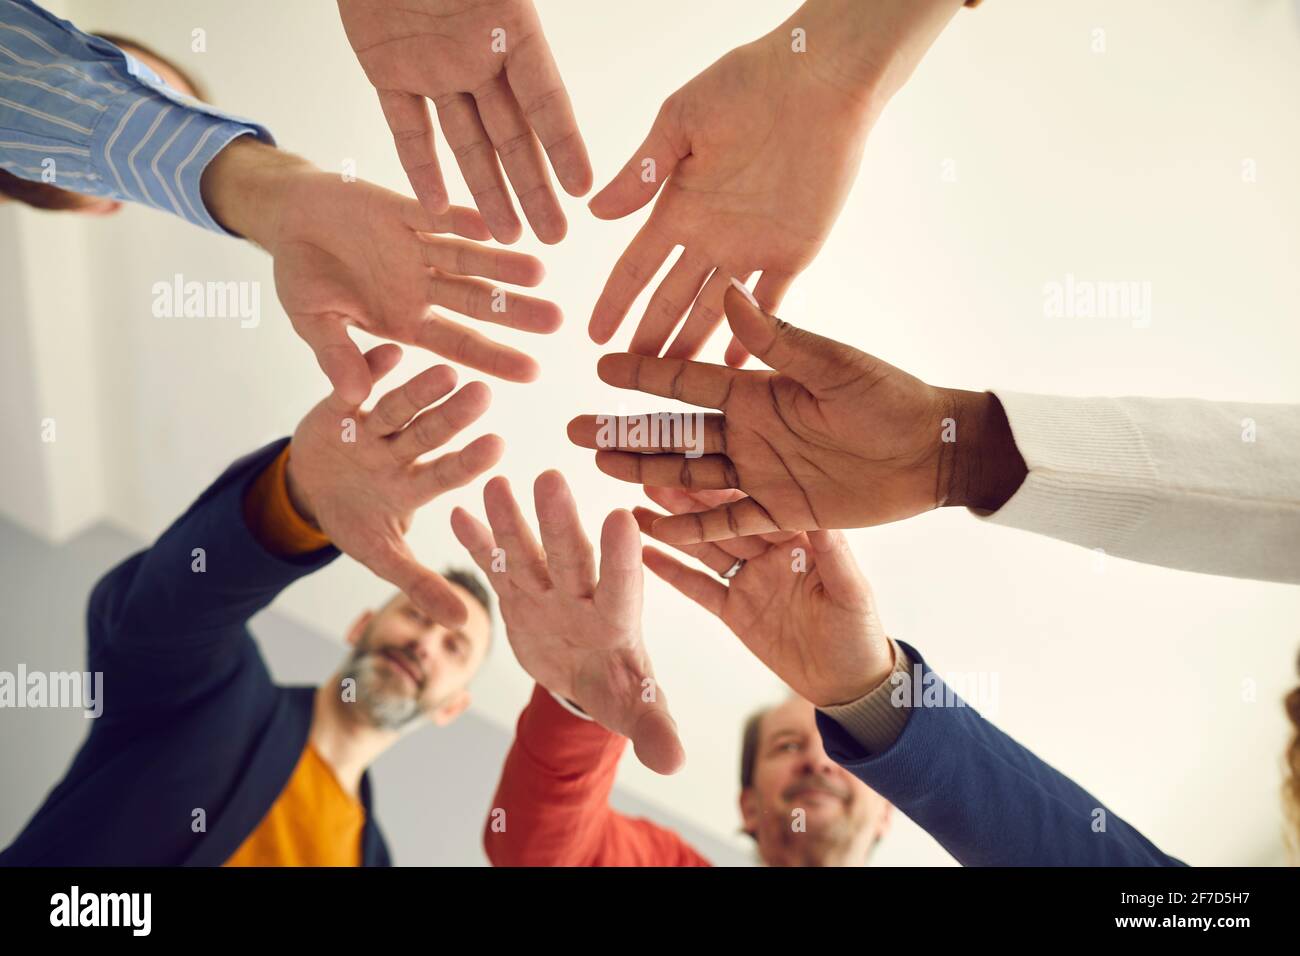 Shot from below of group of business people joining hands showing unity and team spirit Stock Photo